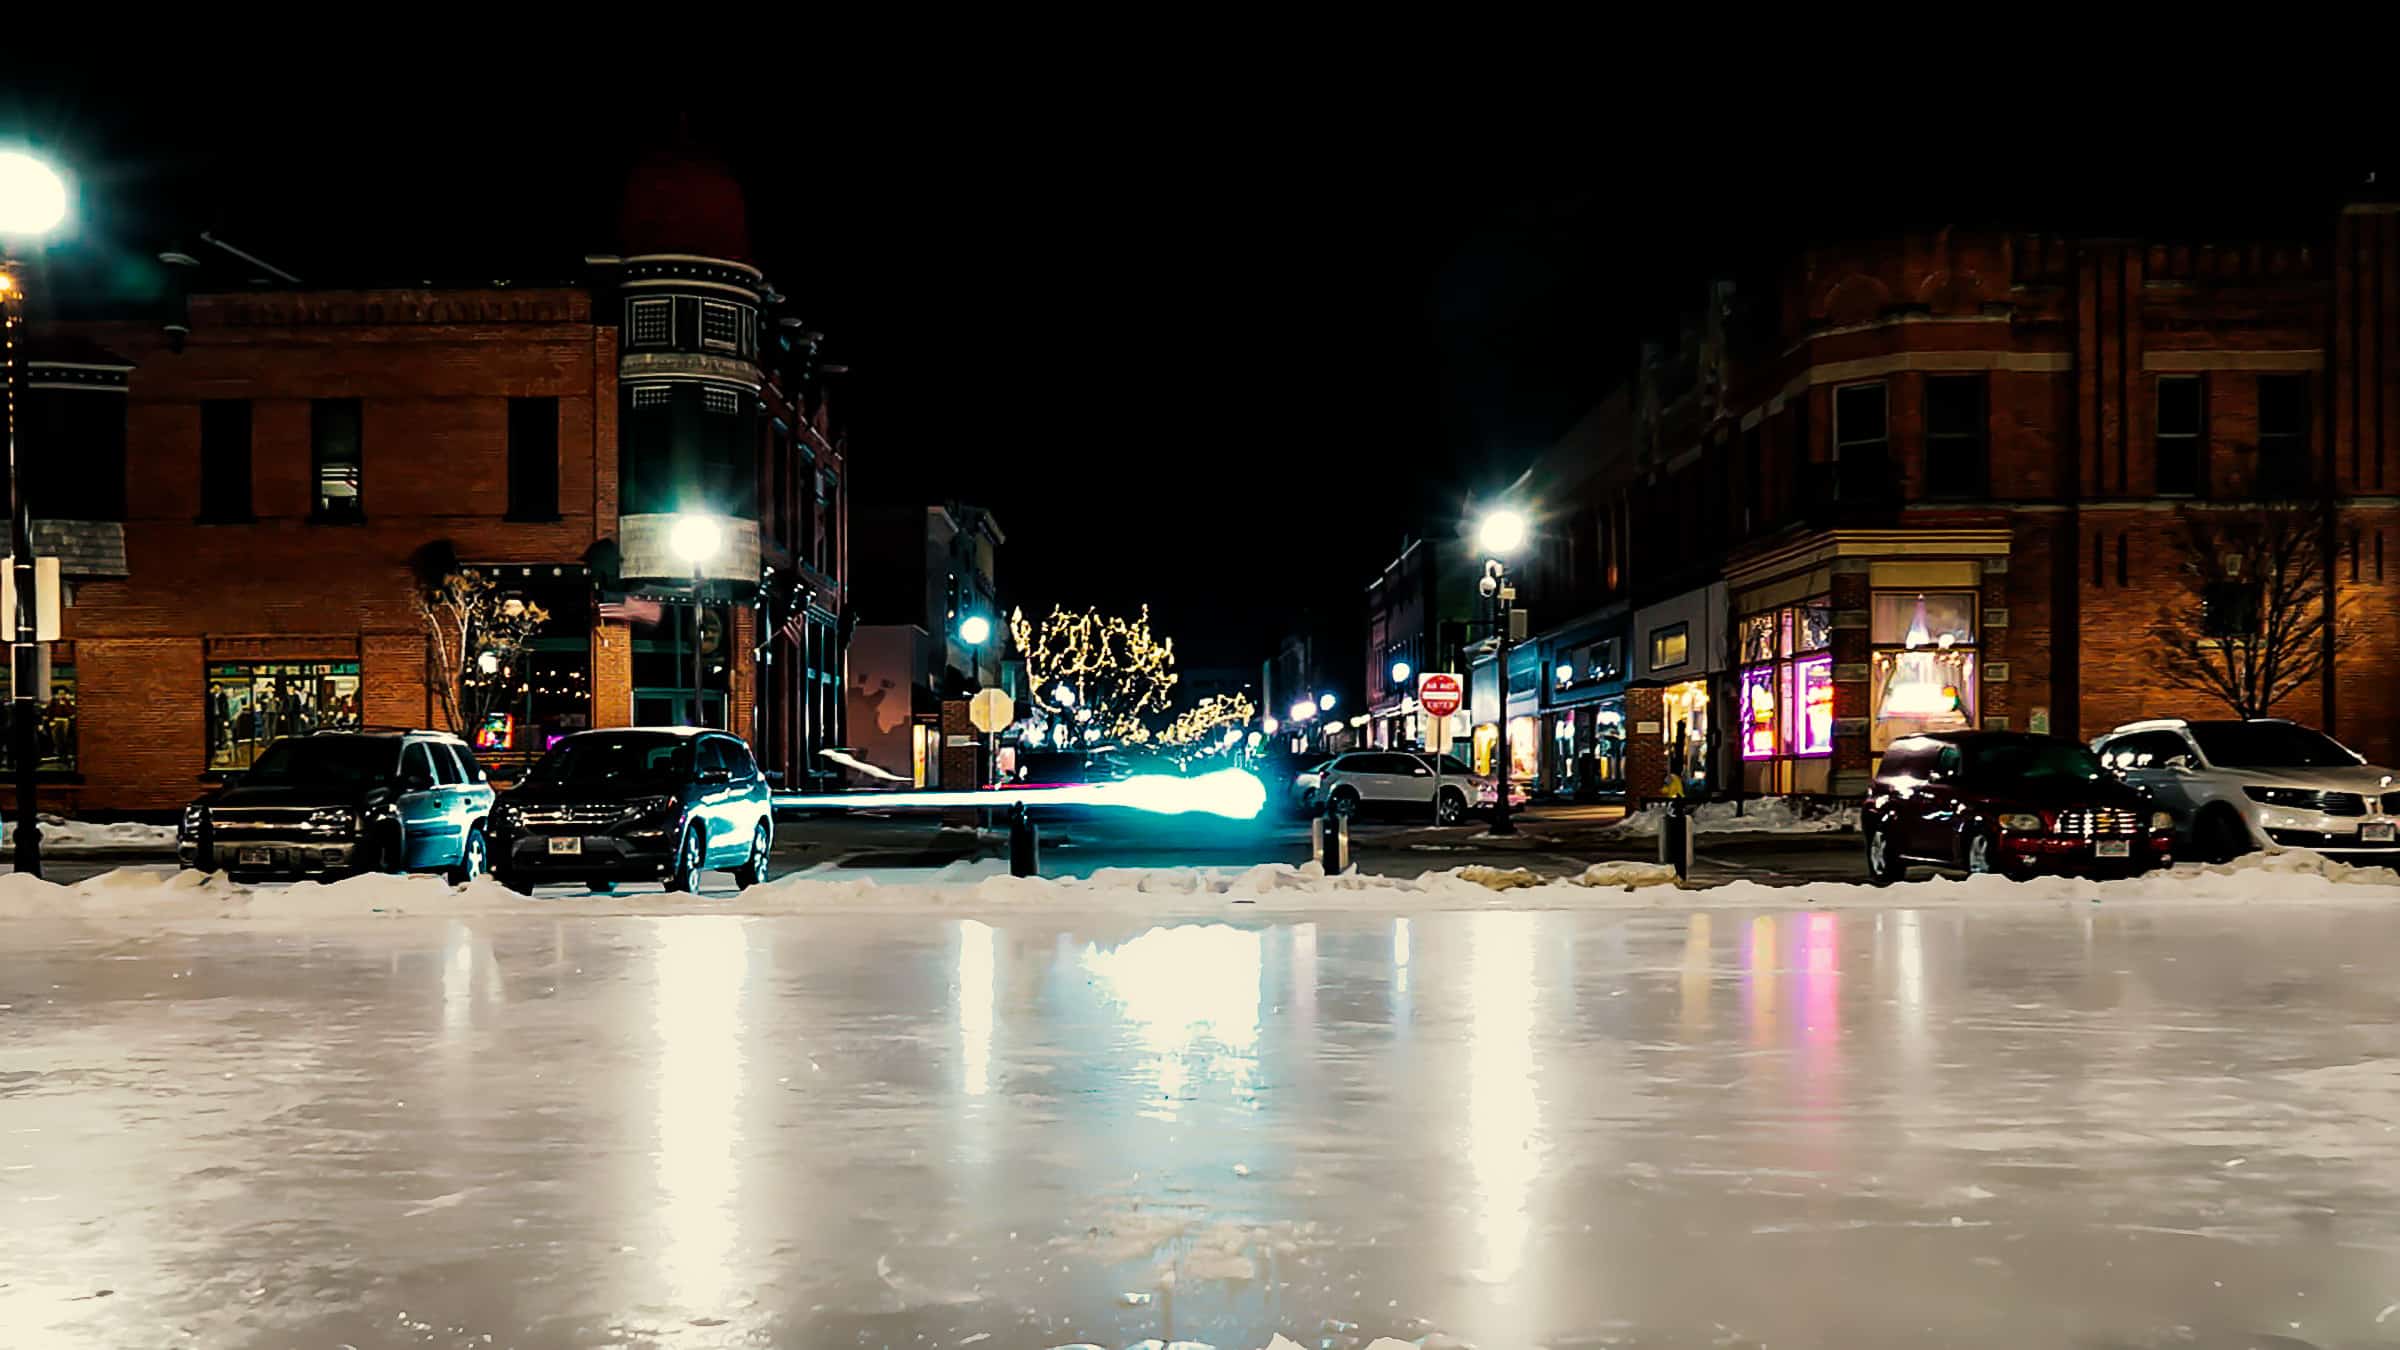 Downtown Stevens Point at night in the winter with ice rink in the center square